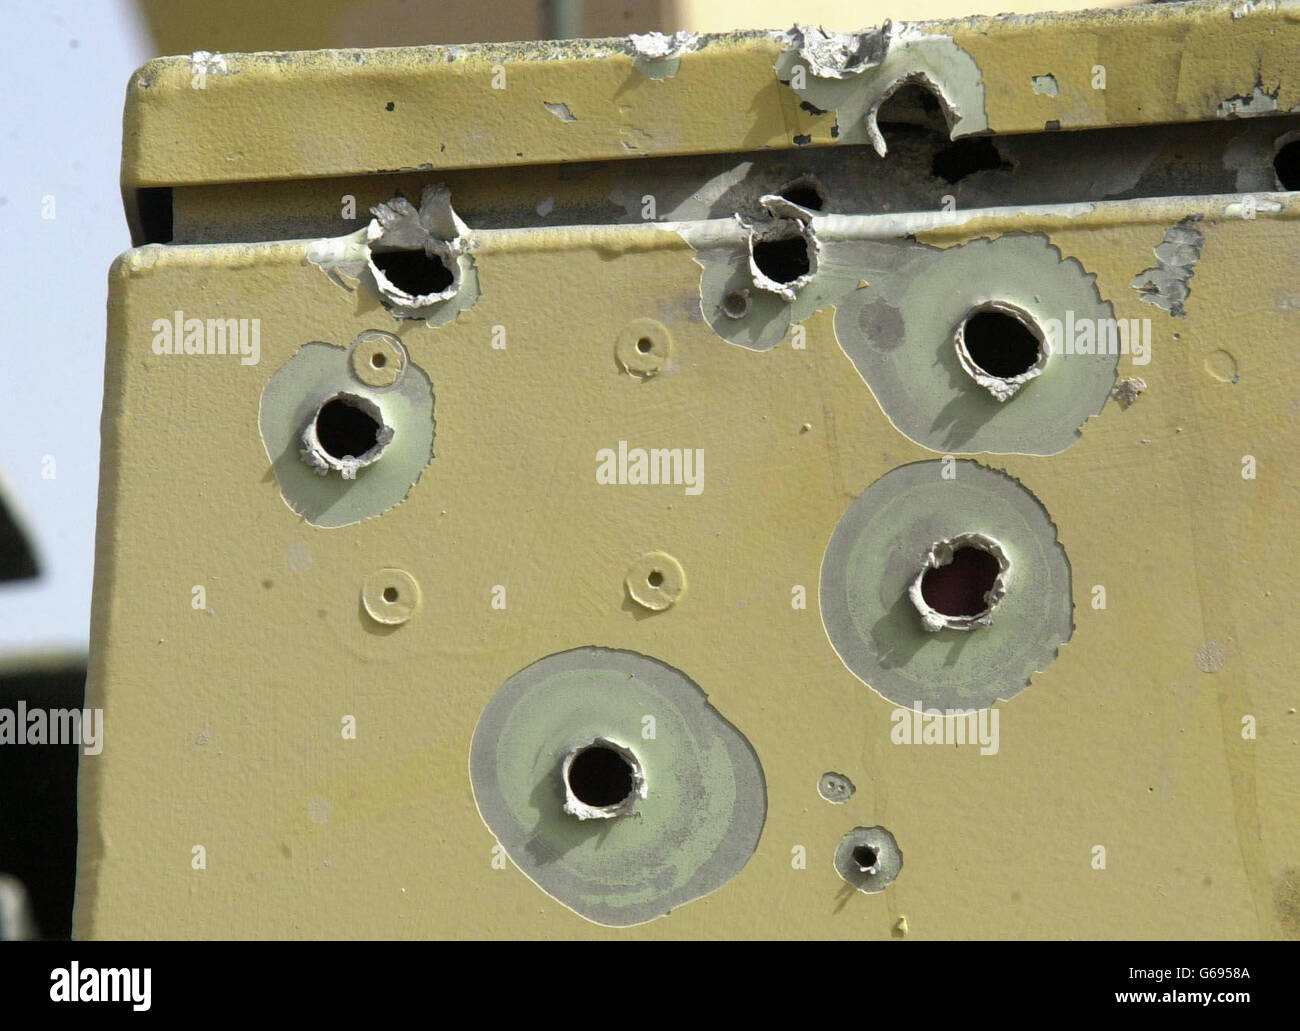 Bullet holes in a British Army Challenger 2 tank from C Squadron of the Royal Scots Dragoon Guards battle group which came under fire from rocket propelled grenades and machine gun fire outside Basra. * Its machine gun and main tank gunsight were damaged and the tank commander Sergeant David Baird has described how he witnessed at least four or five children, aged between five and eight, being grabbed by the scruff of the neck and held by Iraqi fighters as they crossed a road in front of his tank. Stock Photo